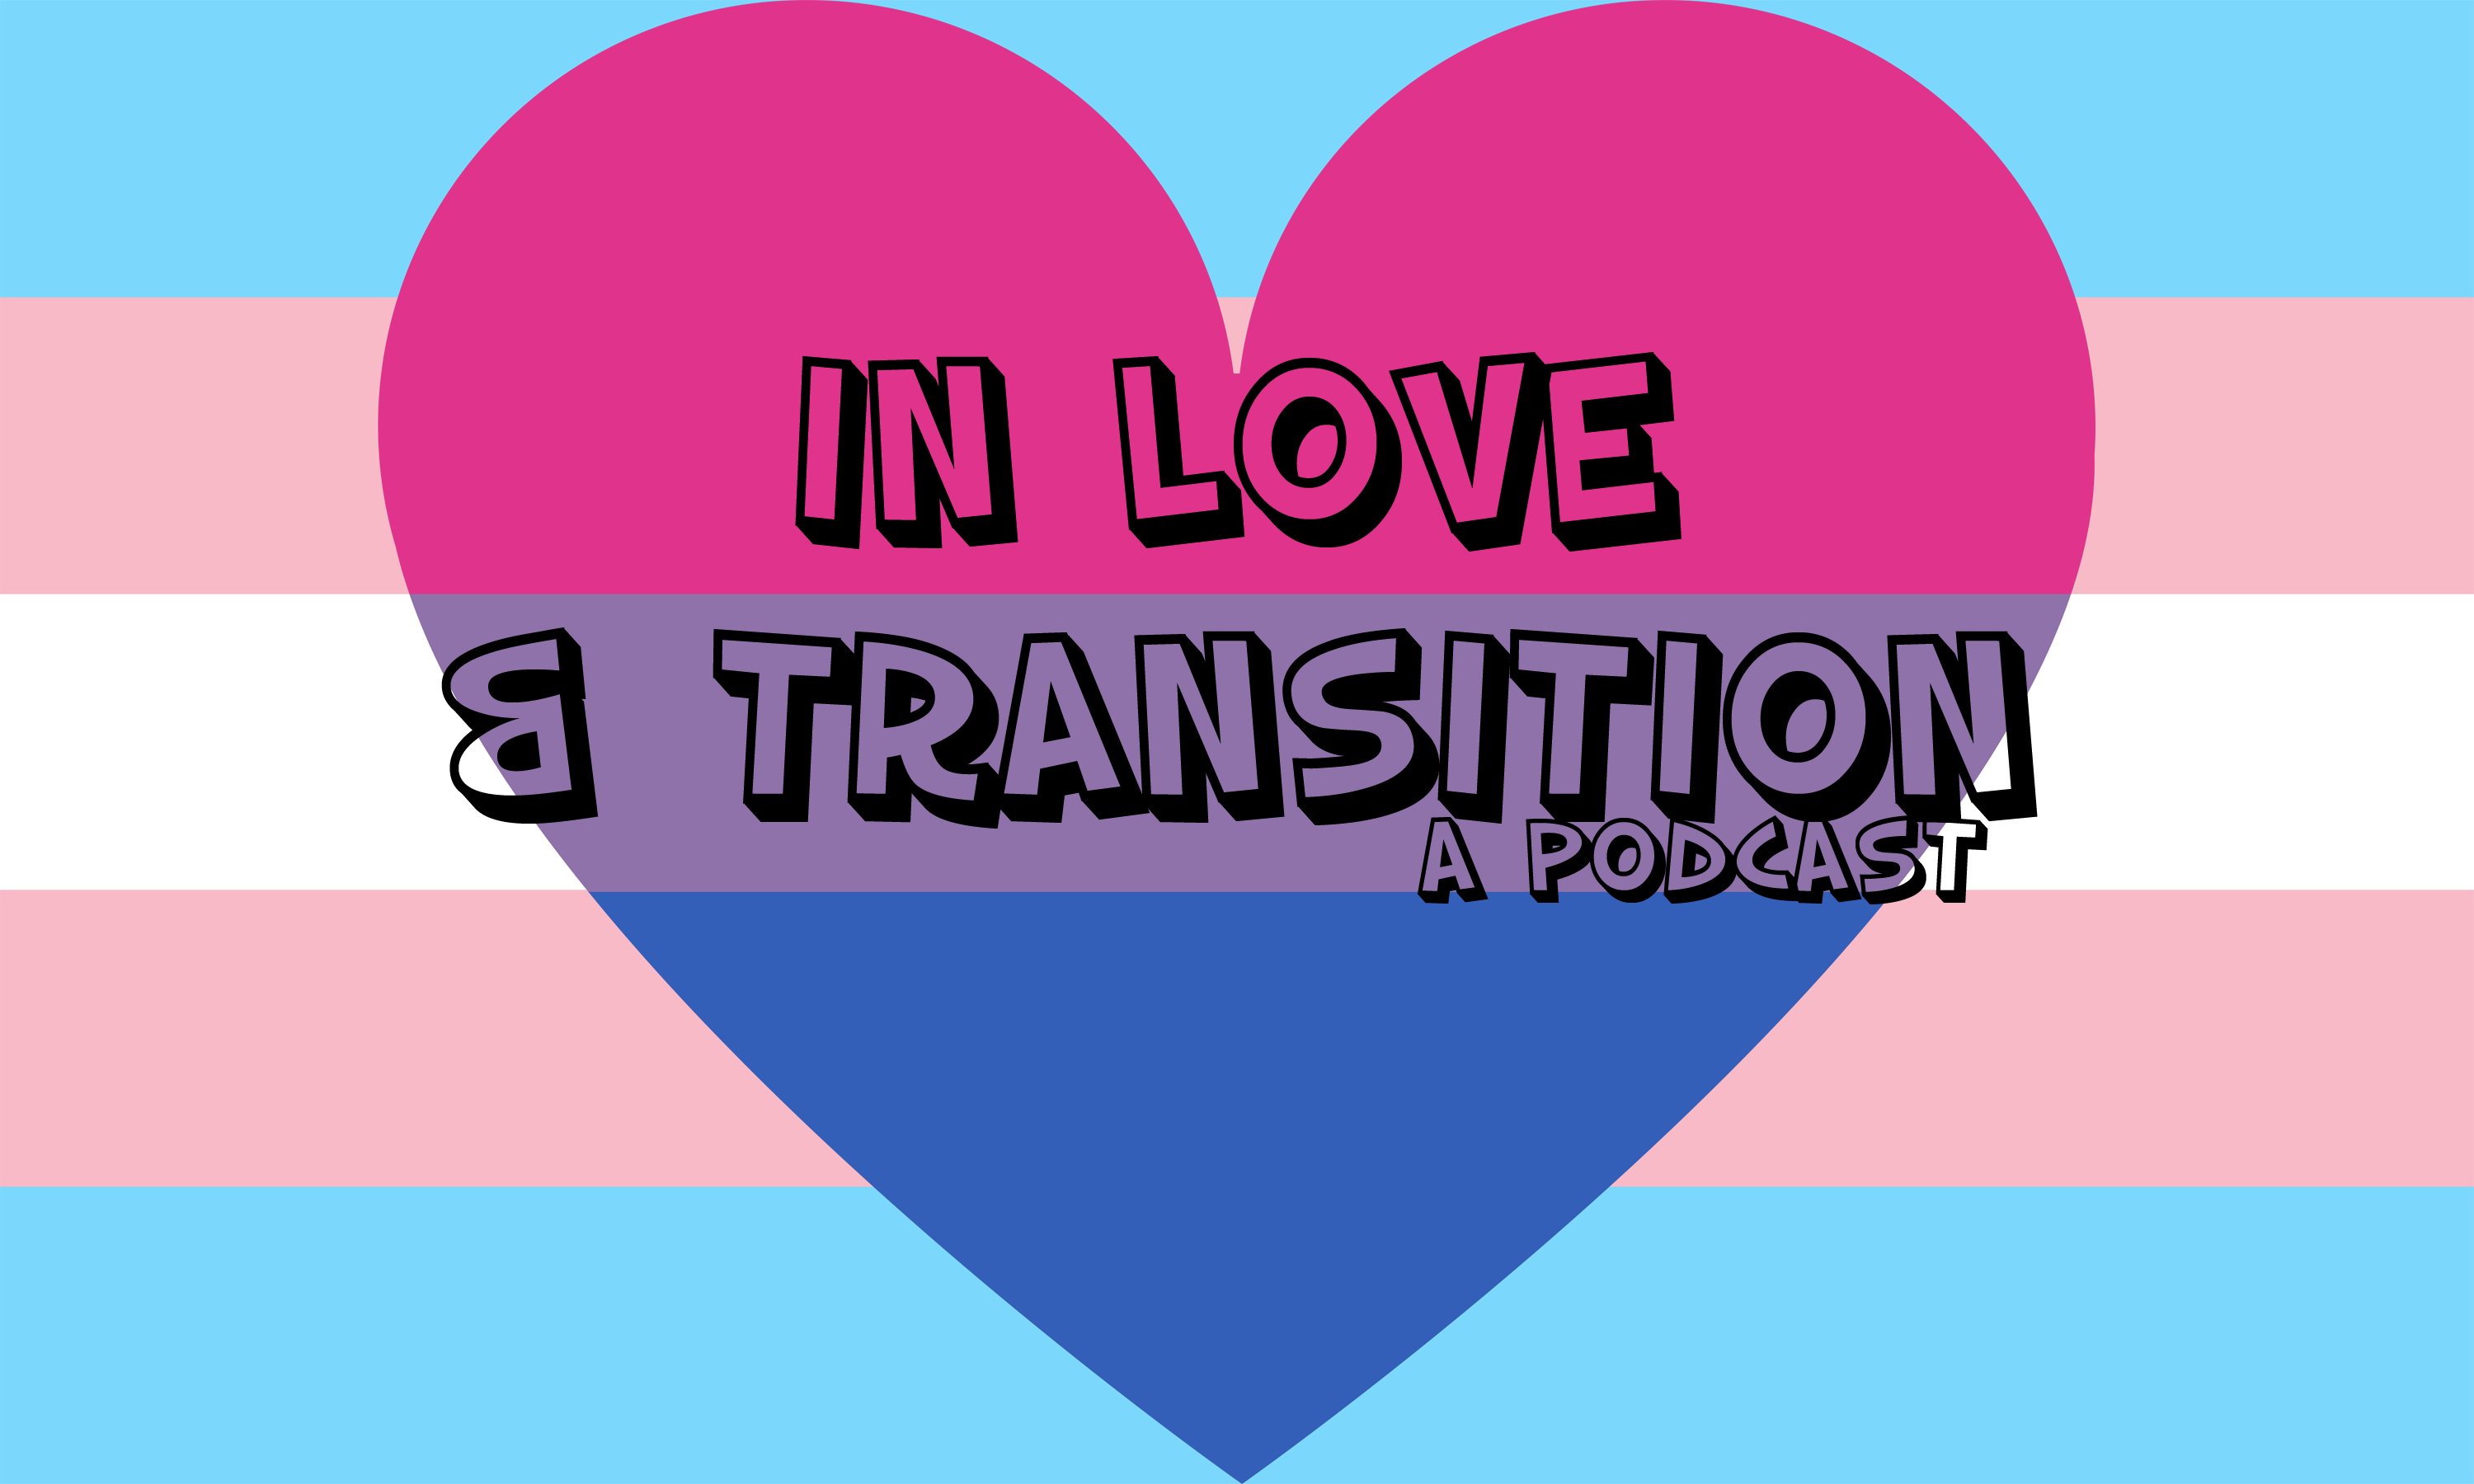 In Love & Transition